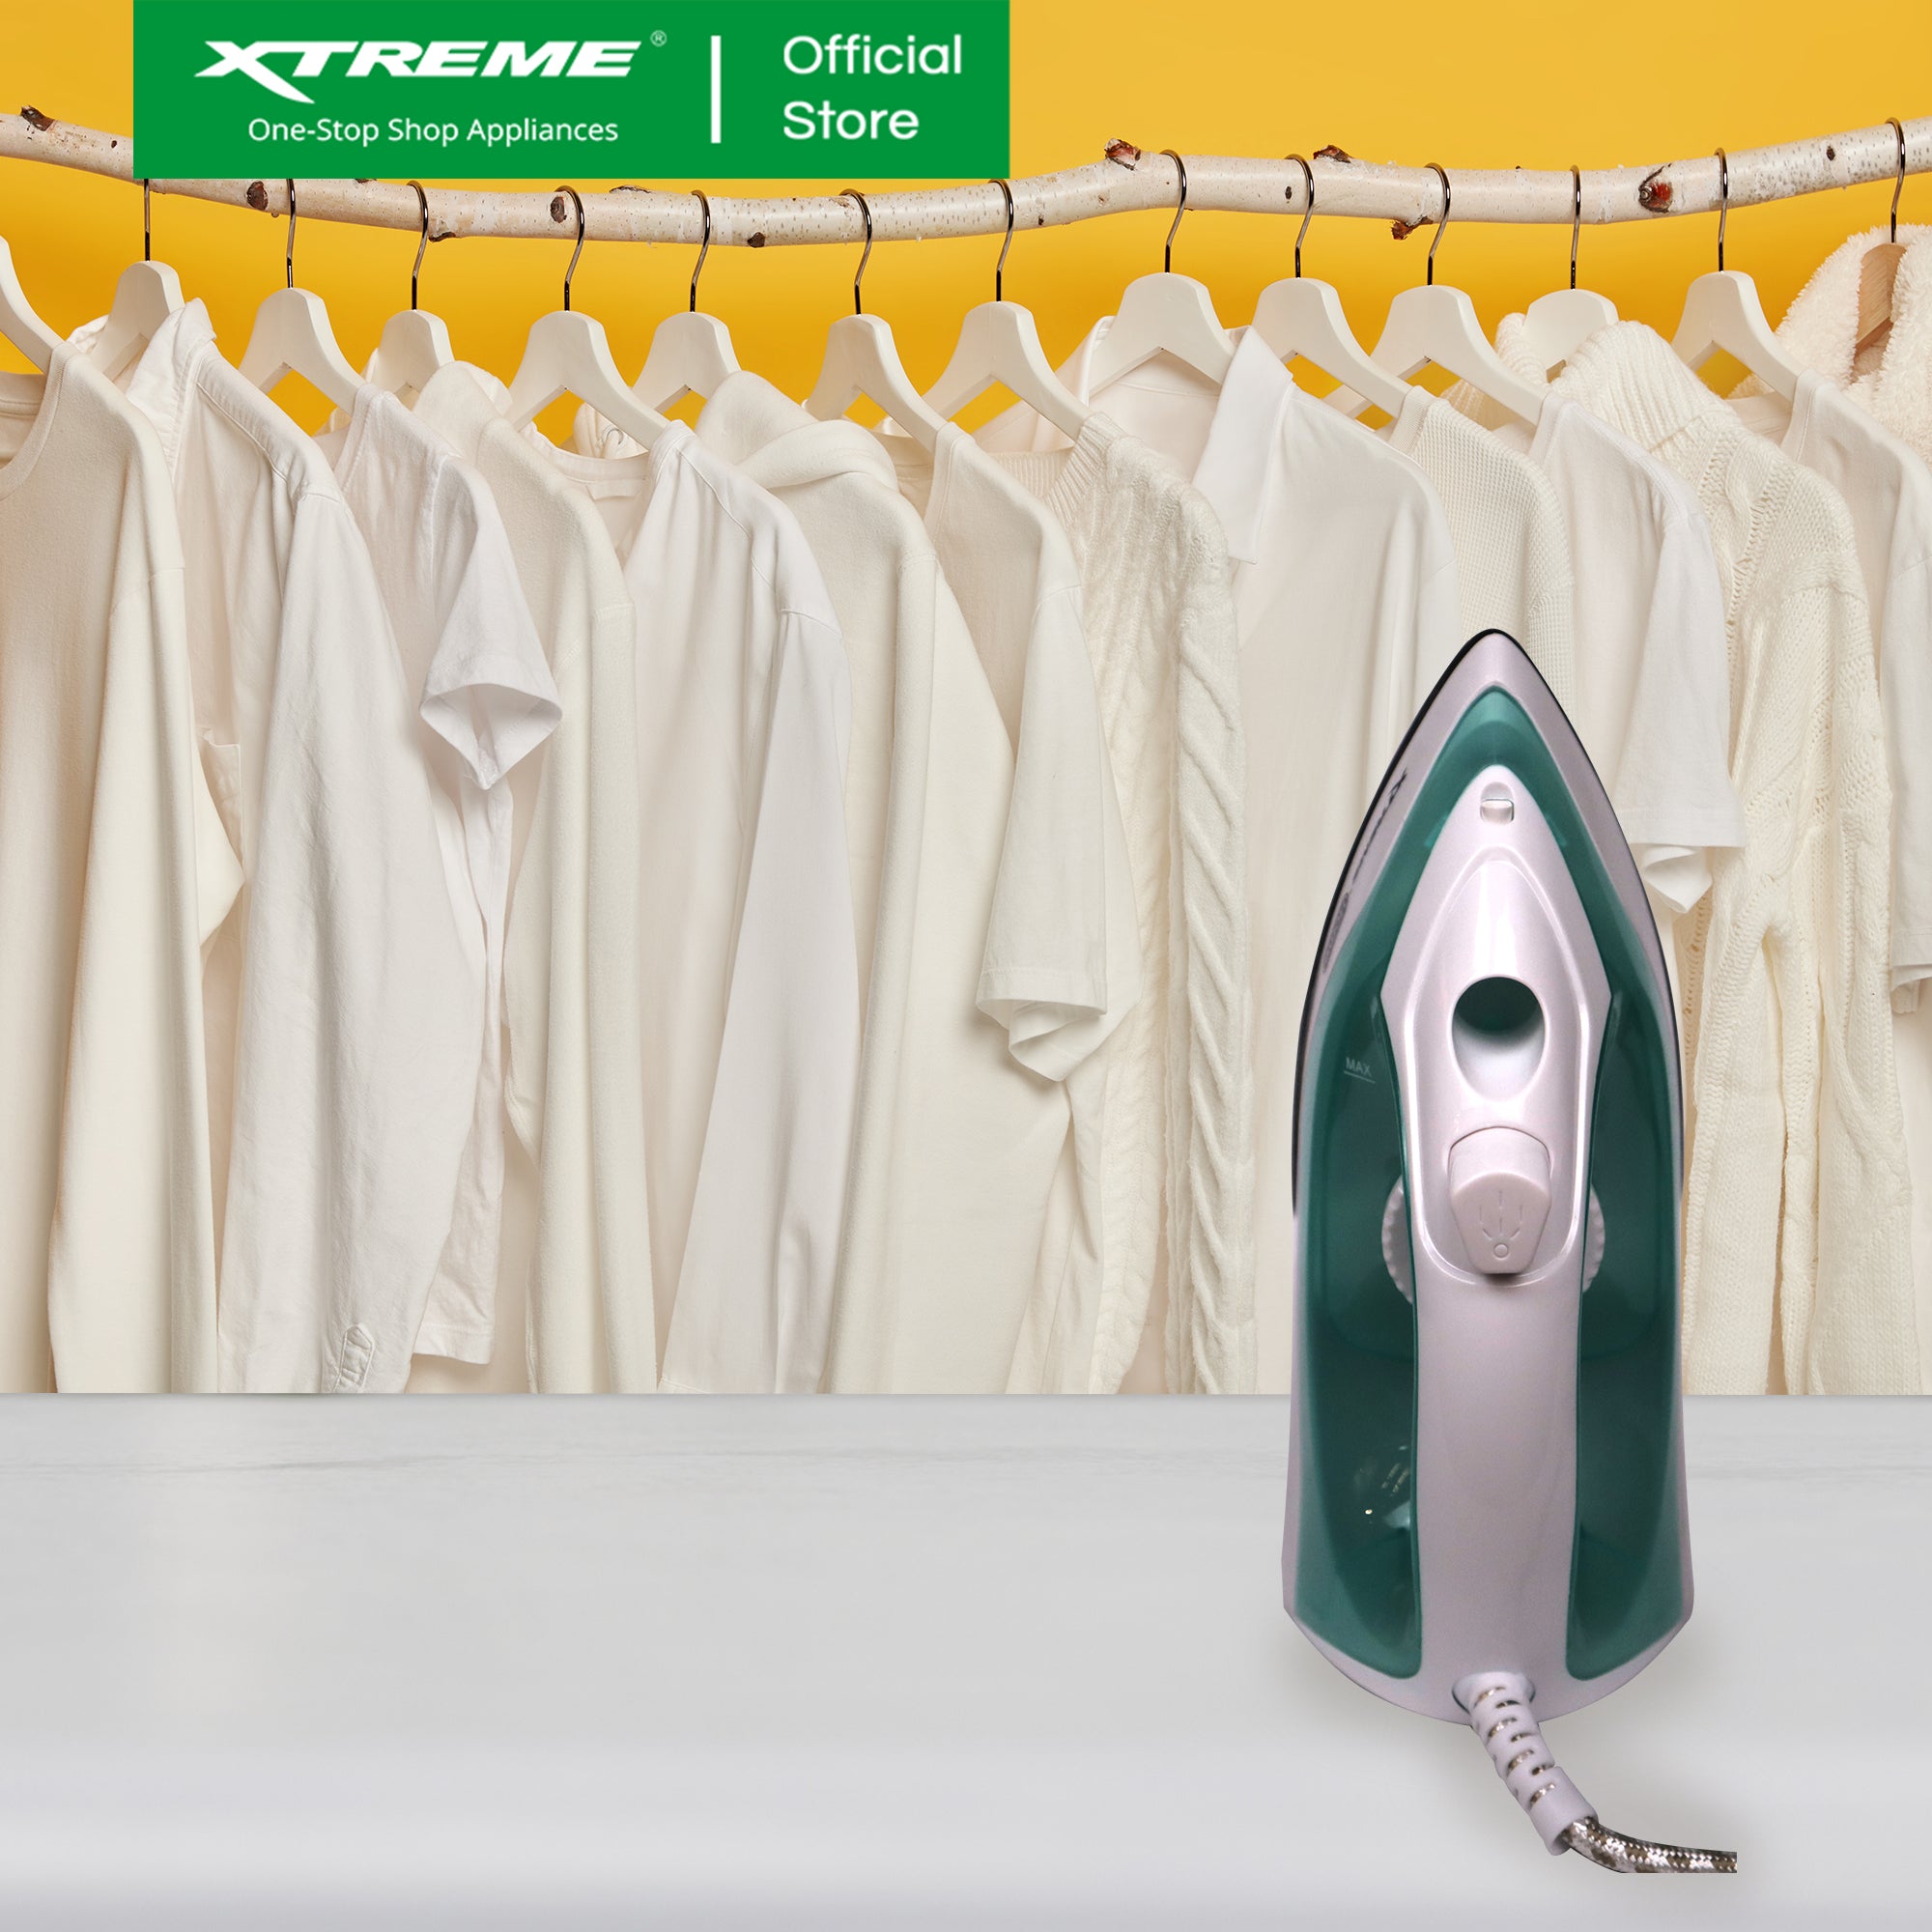 XTREME HOME Dry Iron with Spray Ceramic Soleplate and Indicator Light (Green) | XH-IRONSPRAYGREEN